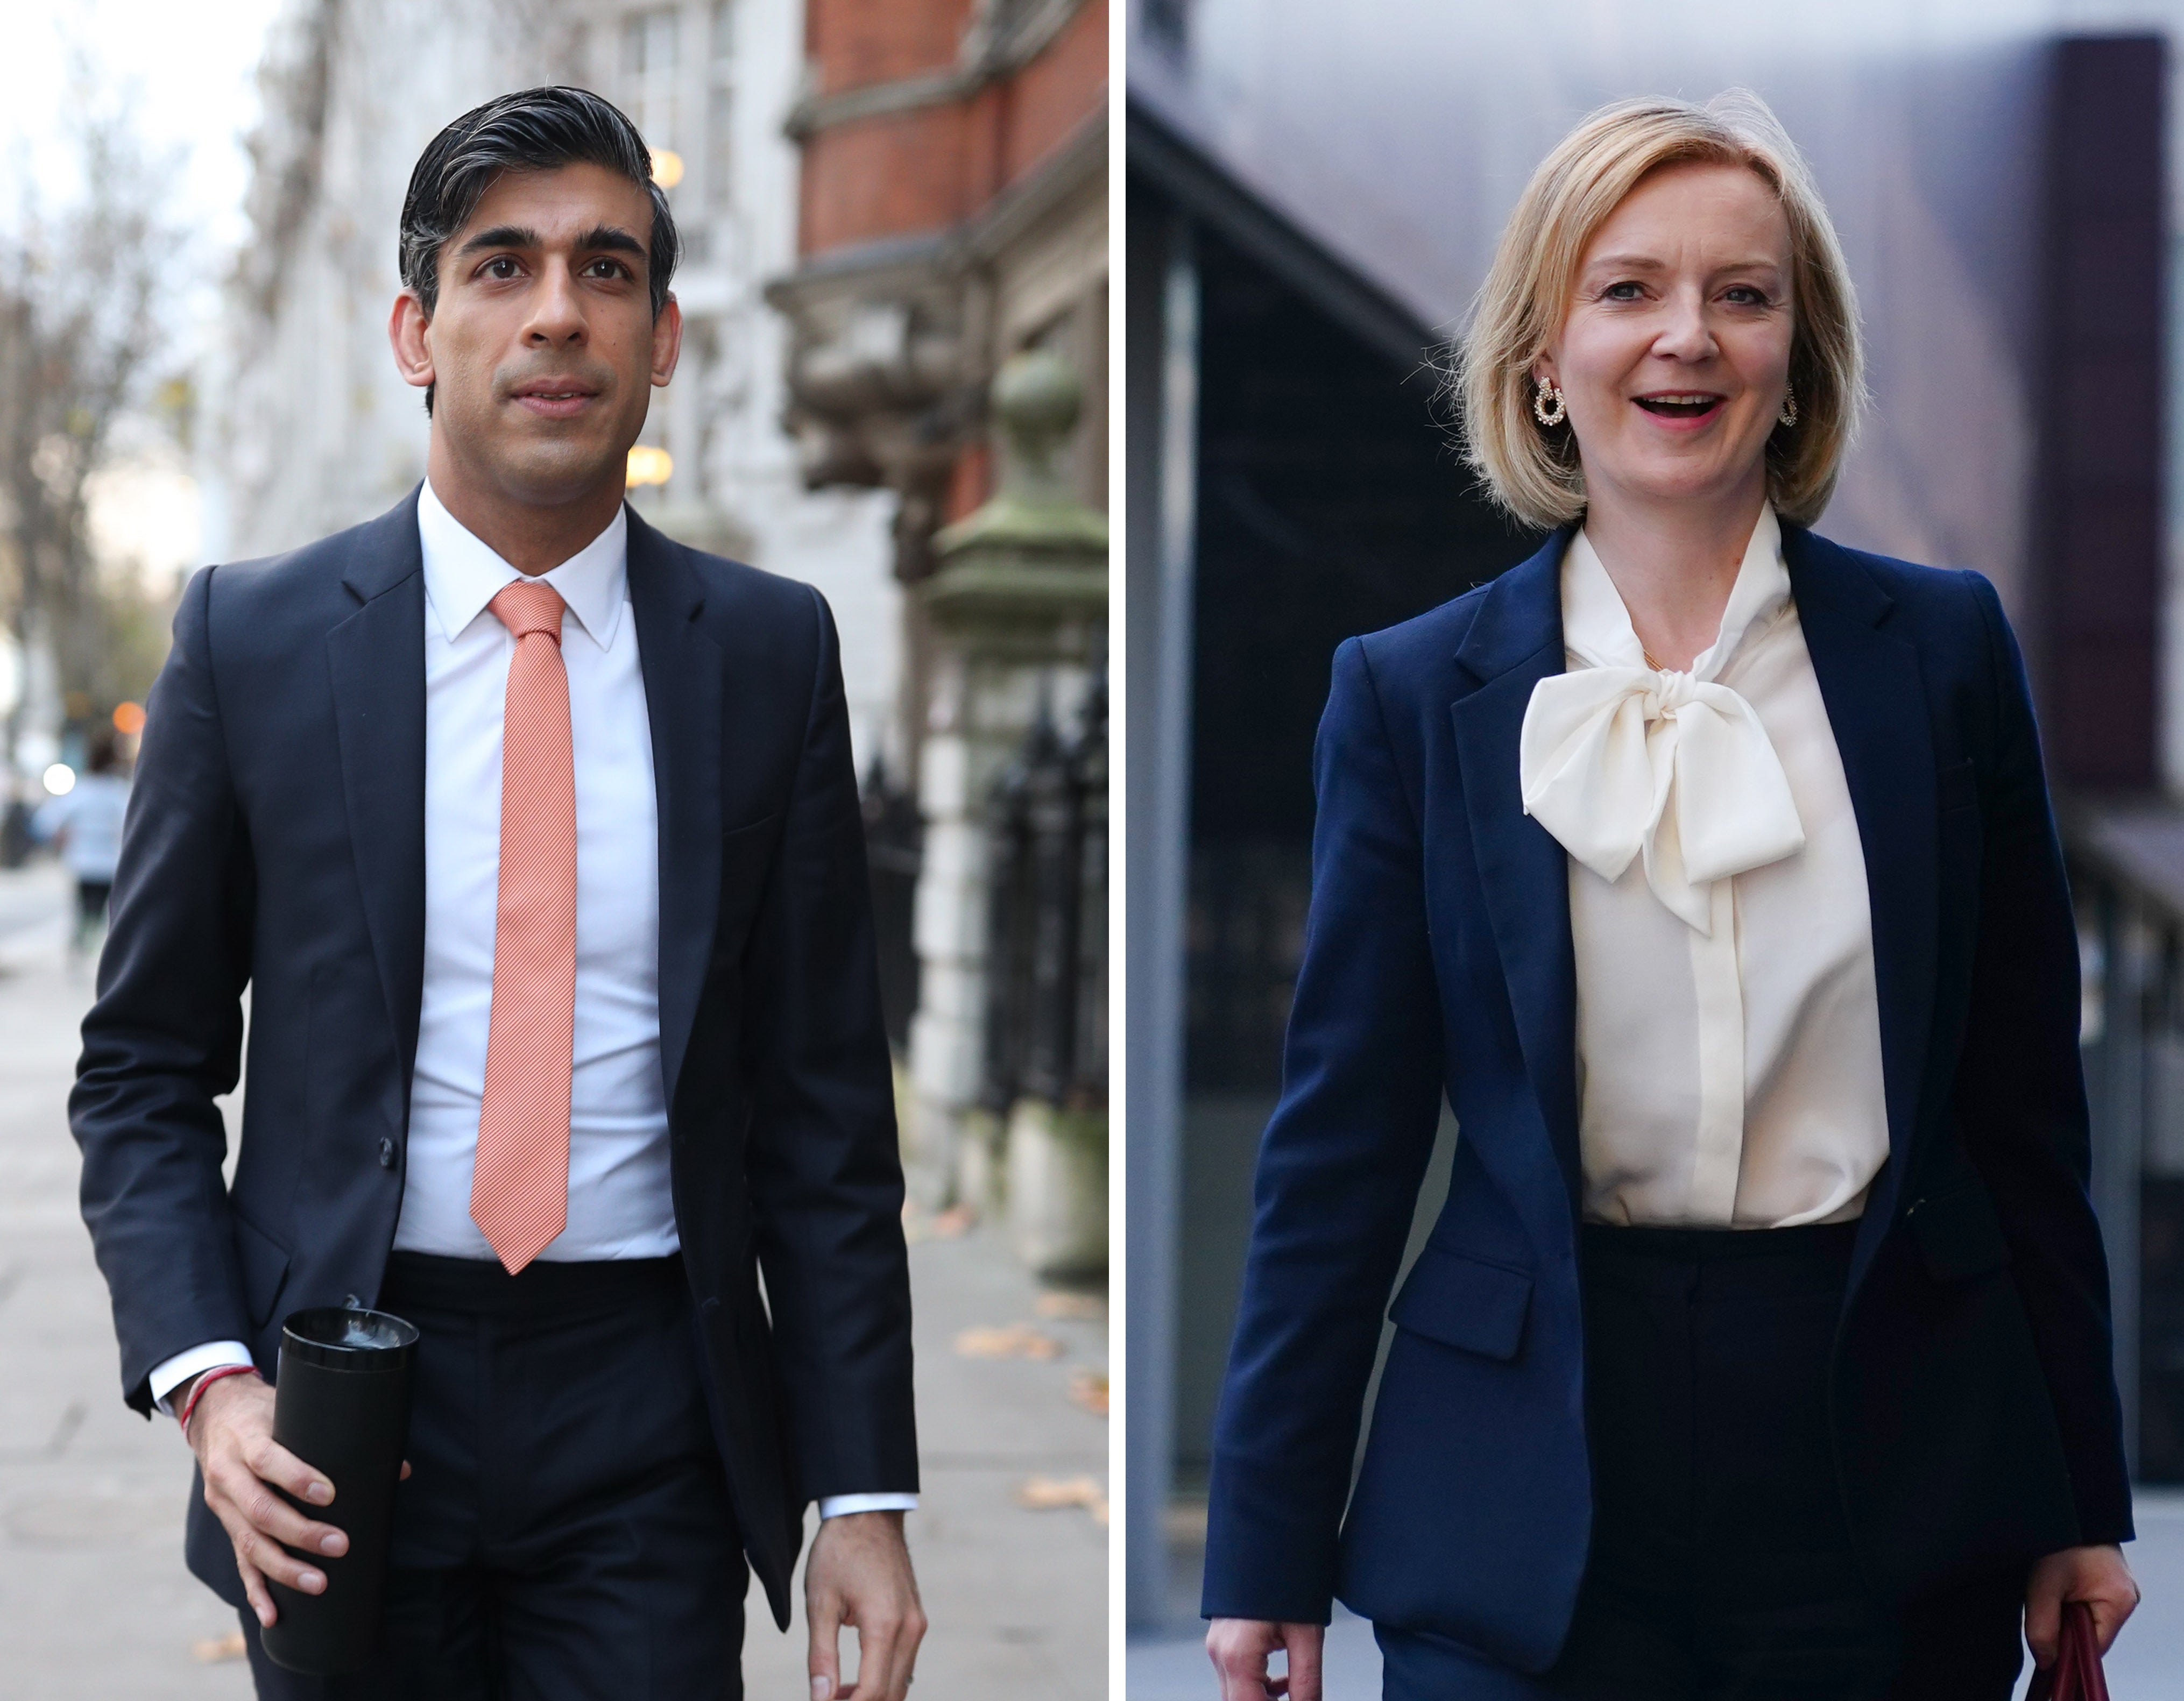 Rishi Sunak and Liz Truss both set out on Sunday policies designed to crack down on illegal migration (PA)